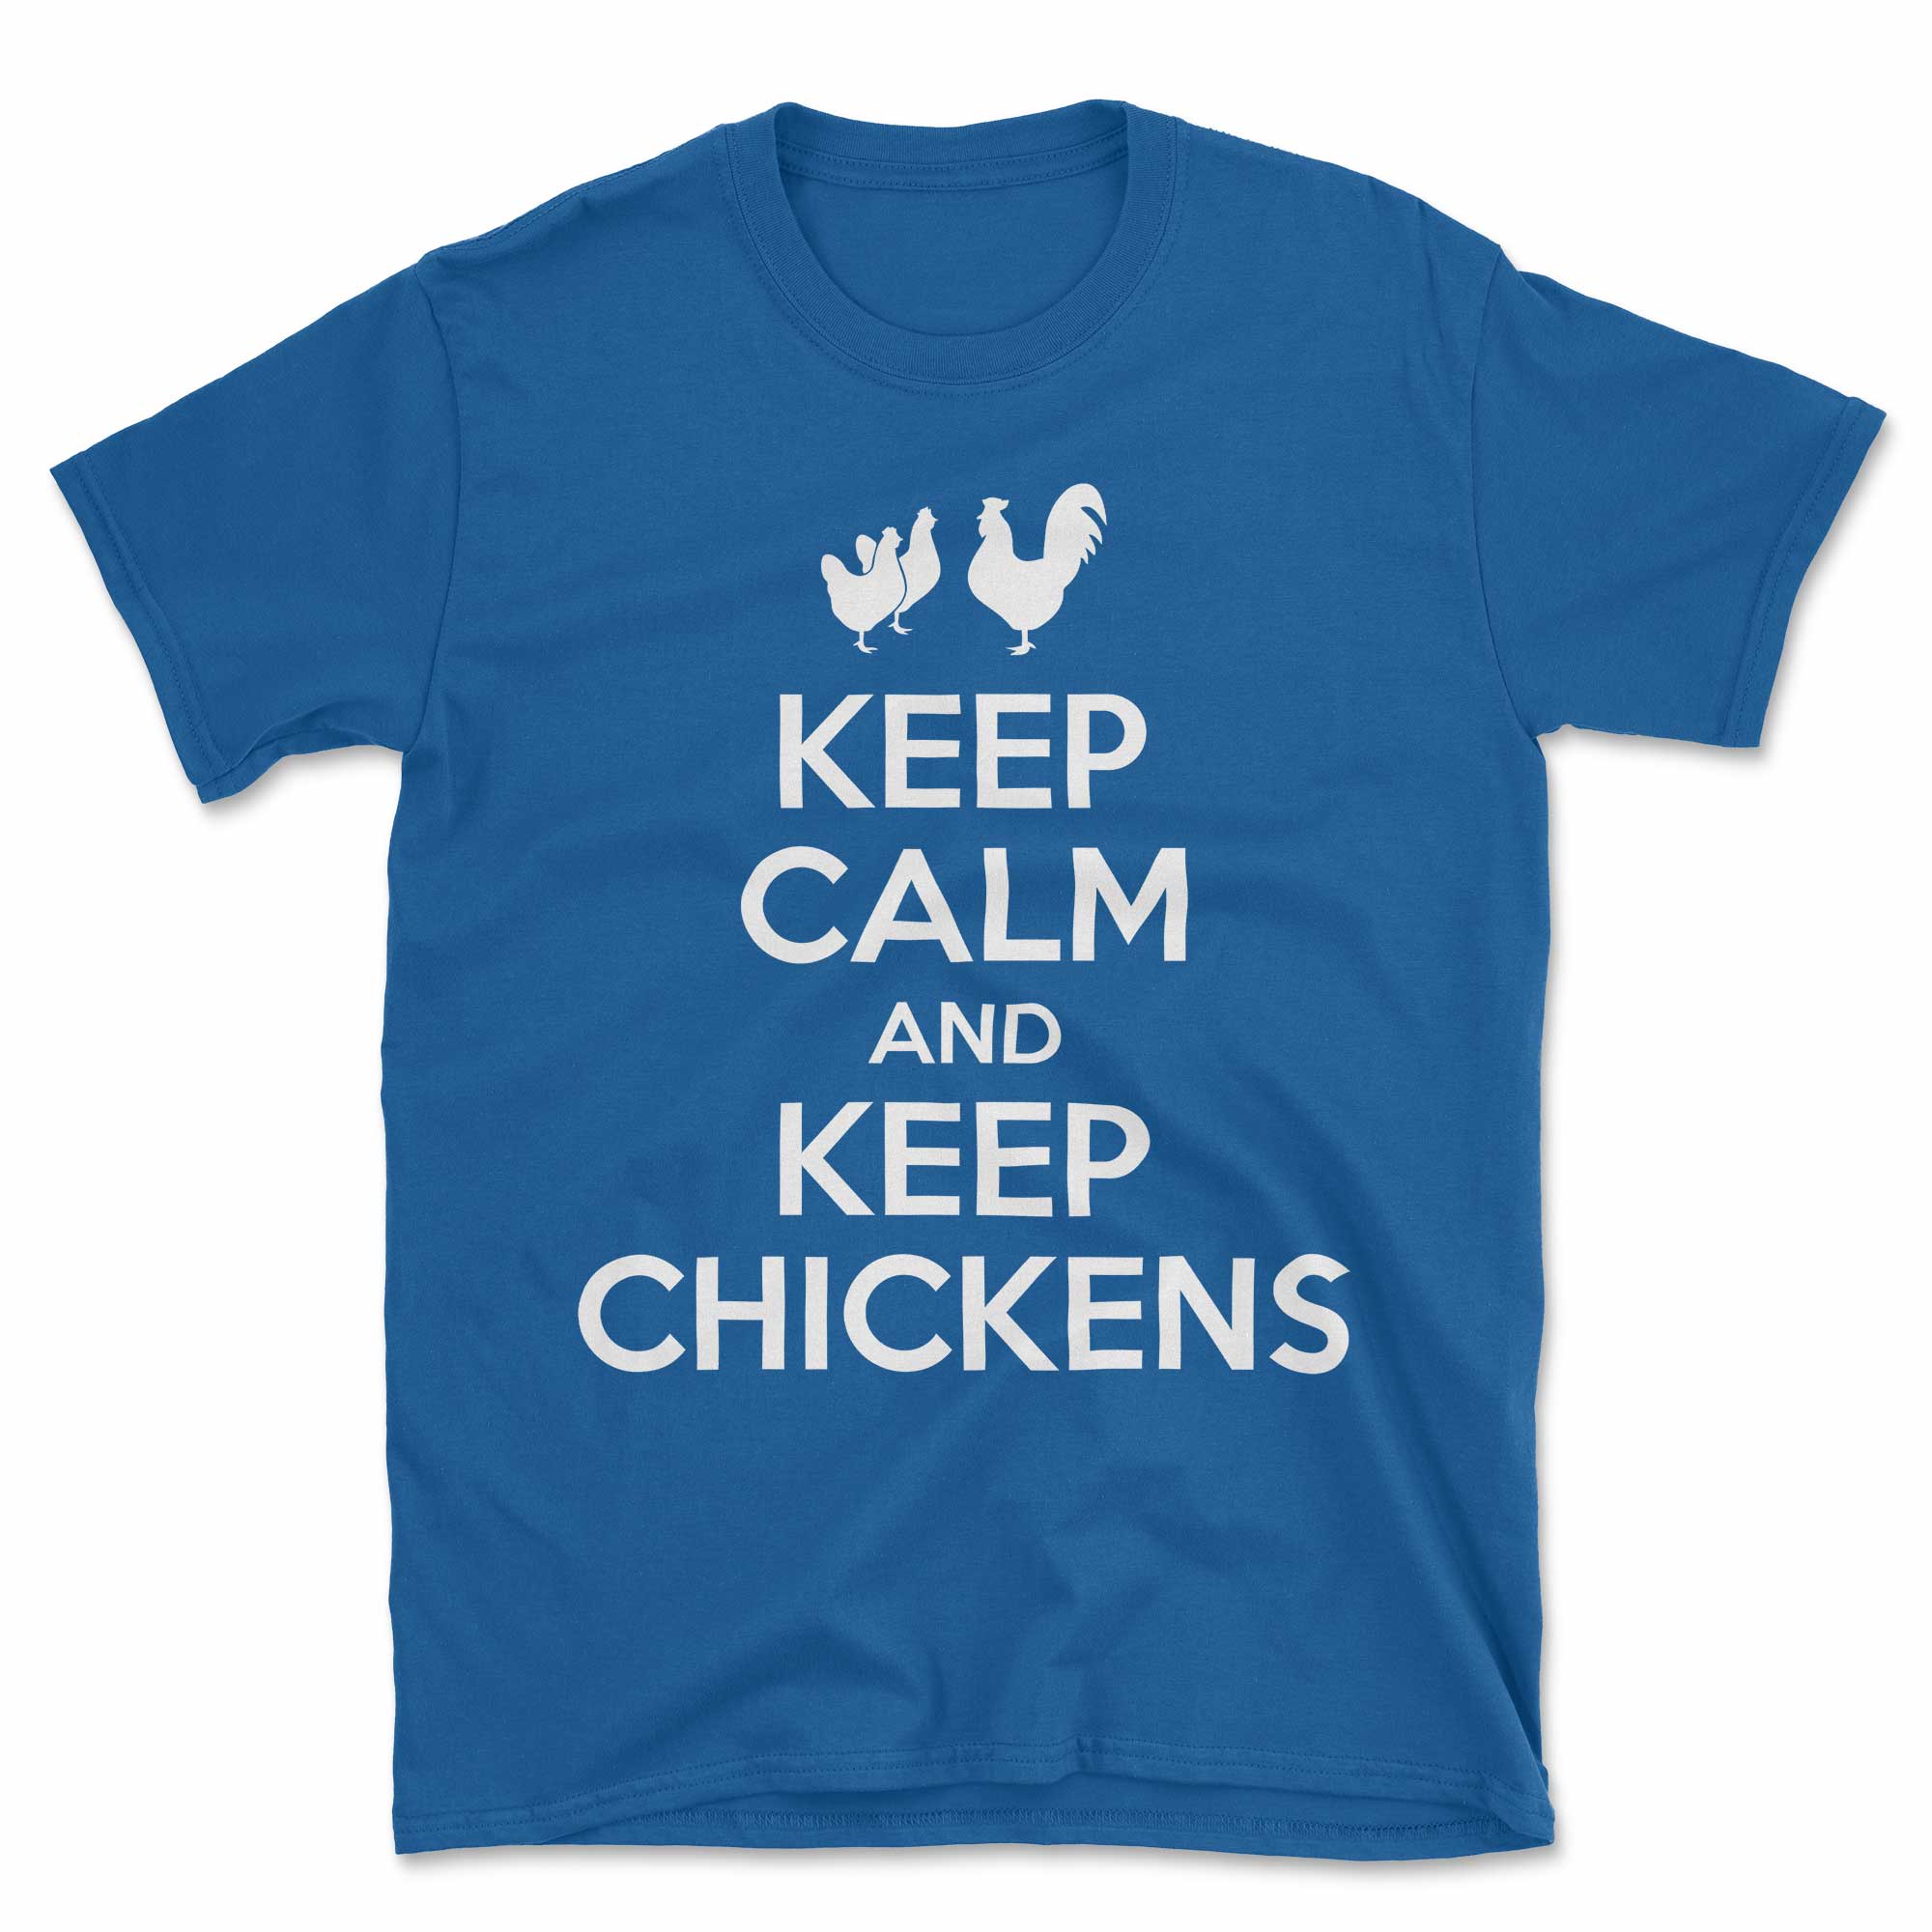 Keep Calm and Keep Chickens T-Shirt